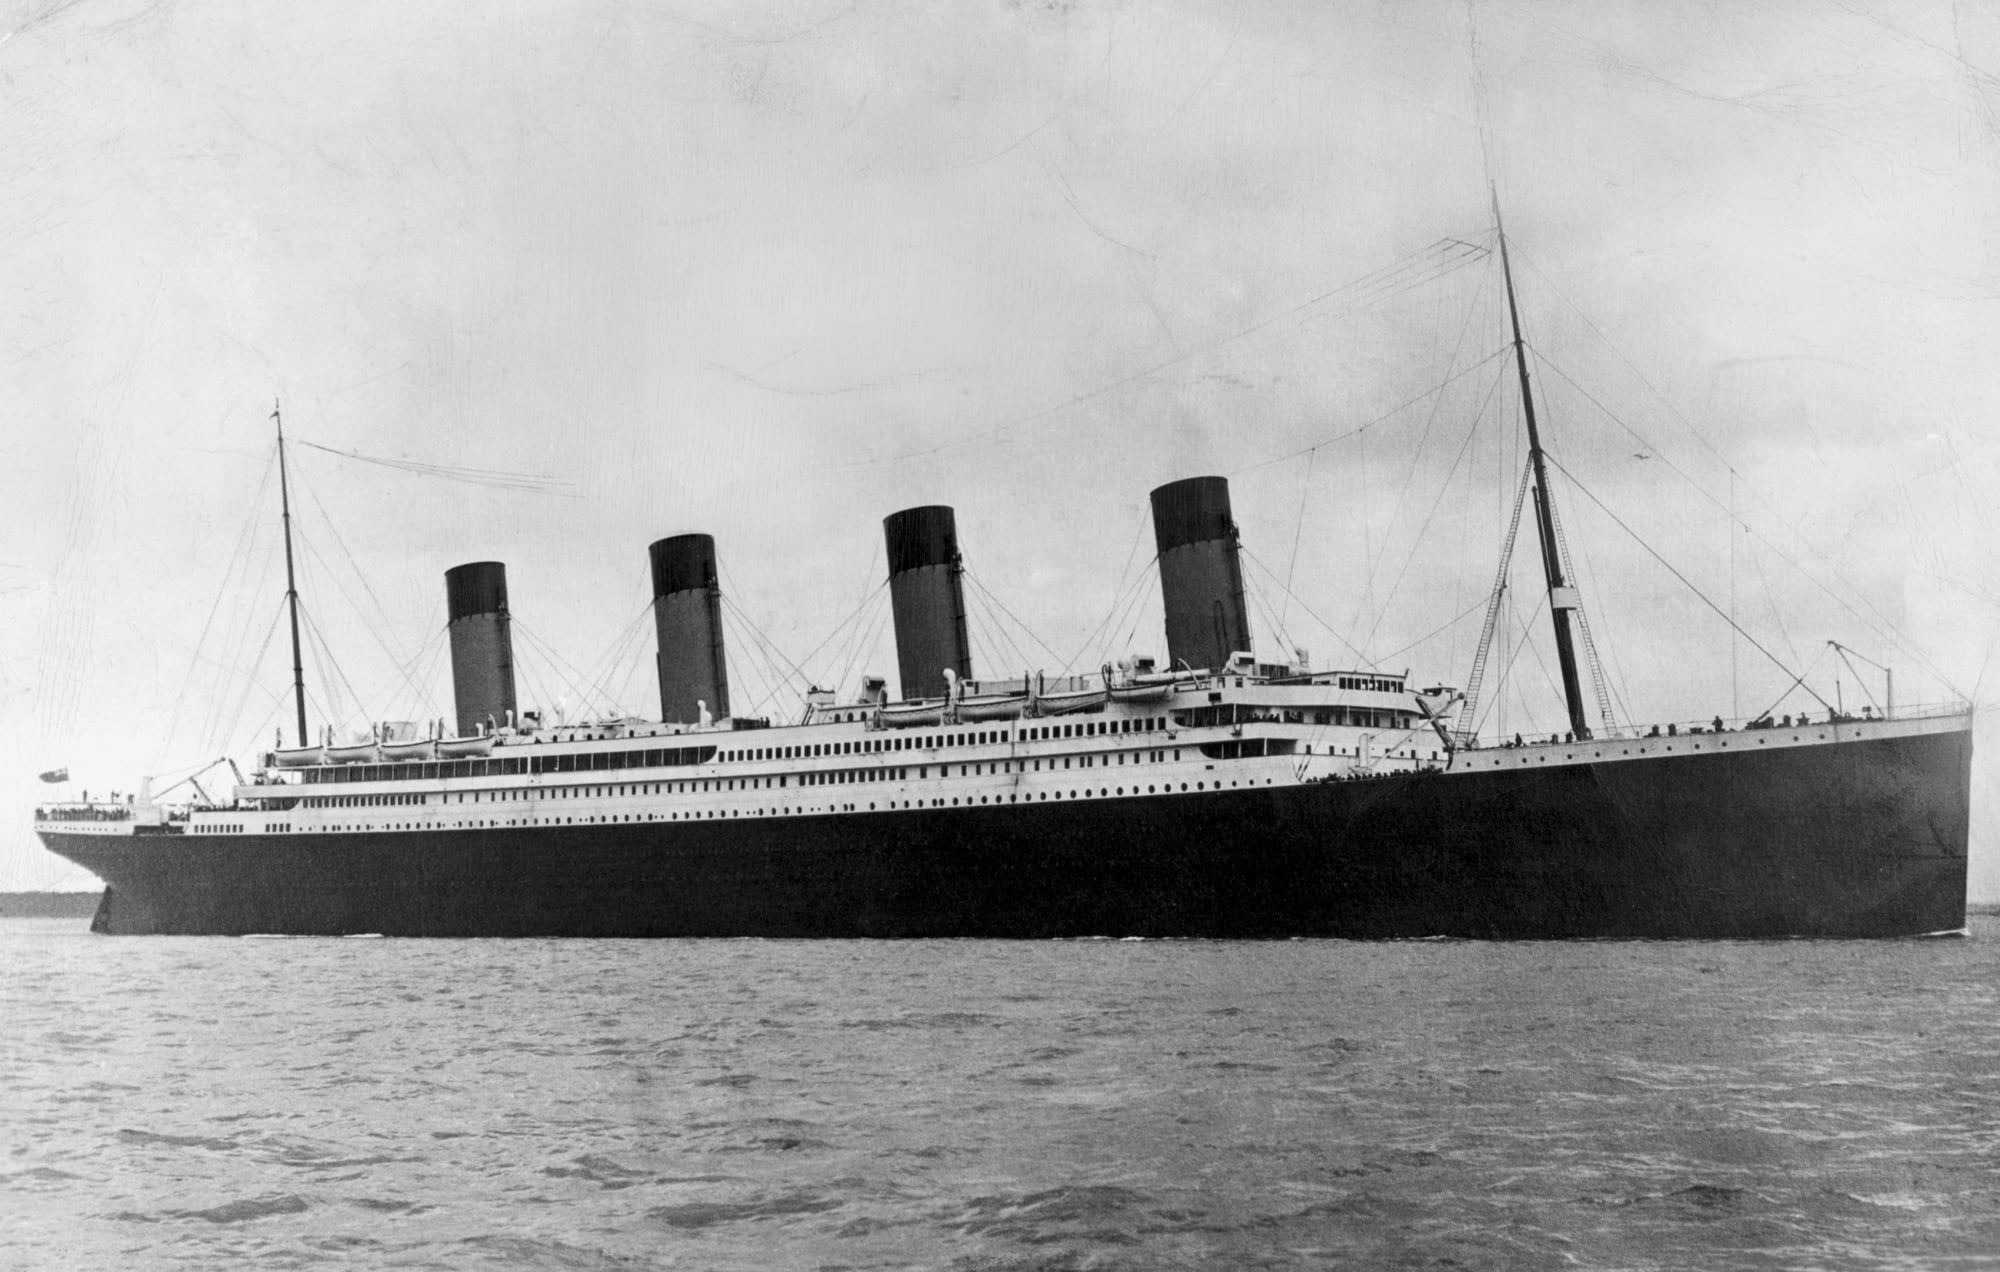 Historical photo shows RMS Titanic from the side, with four prominent funnels.